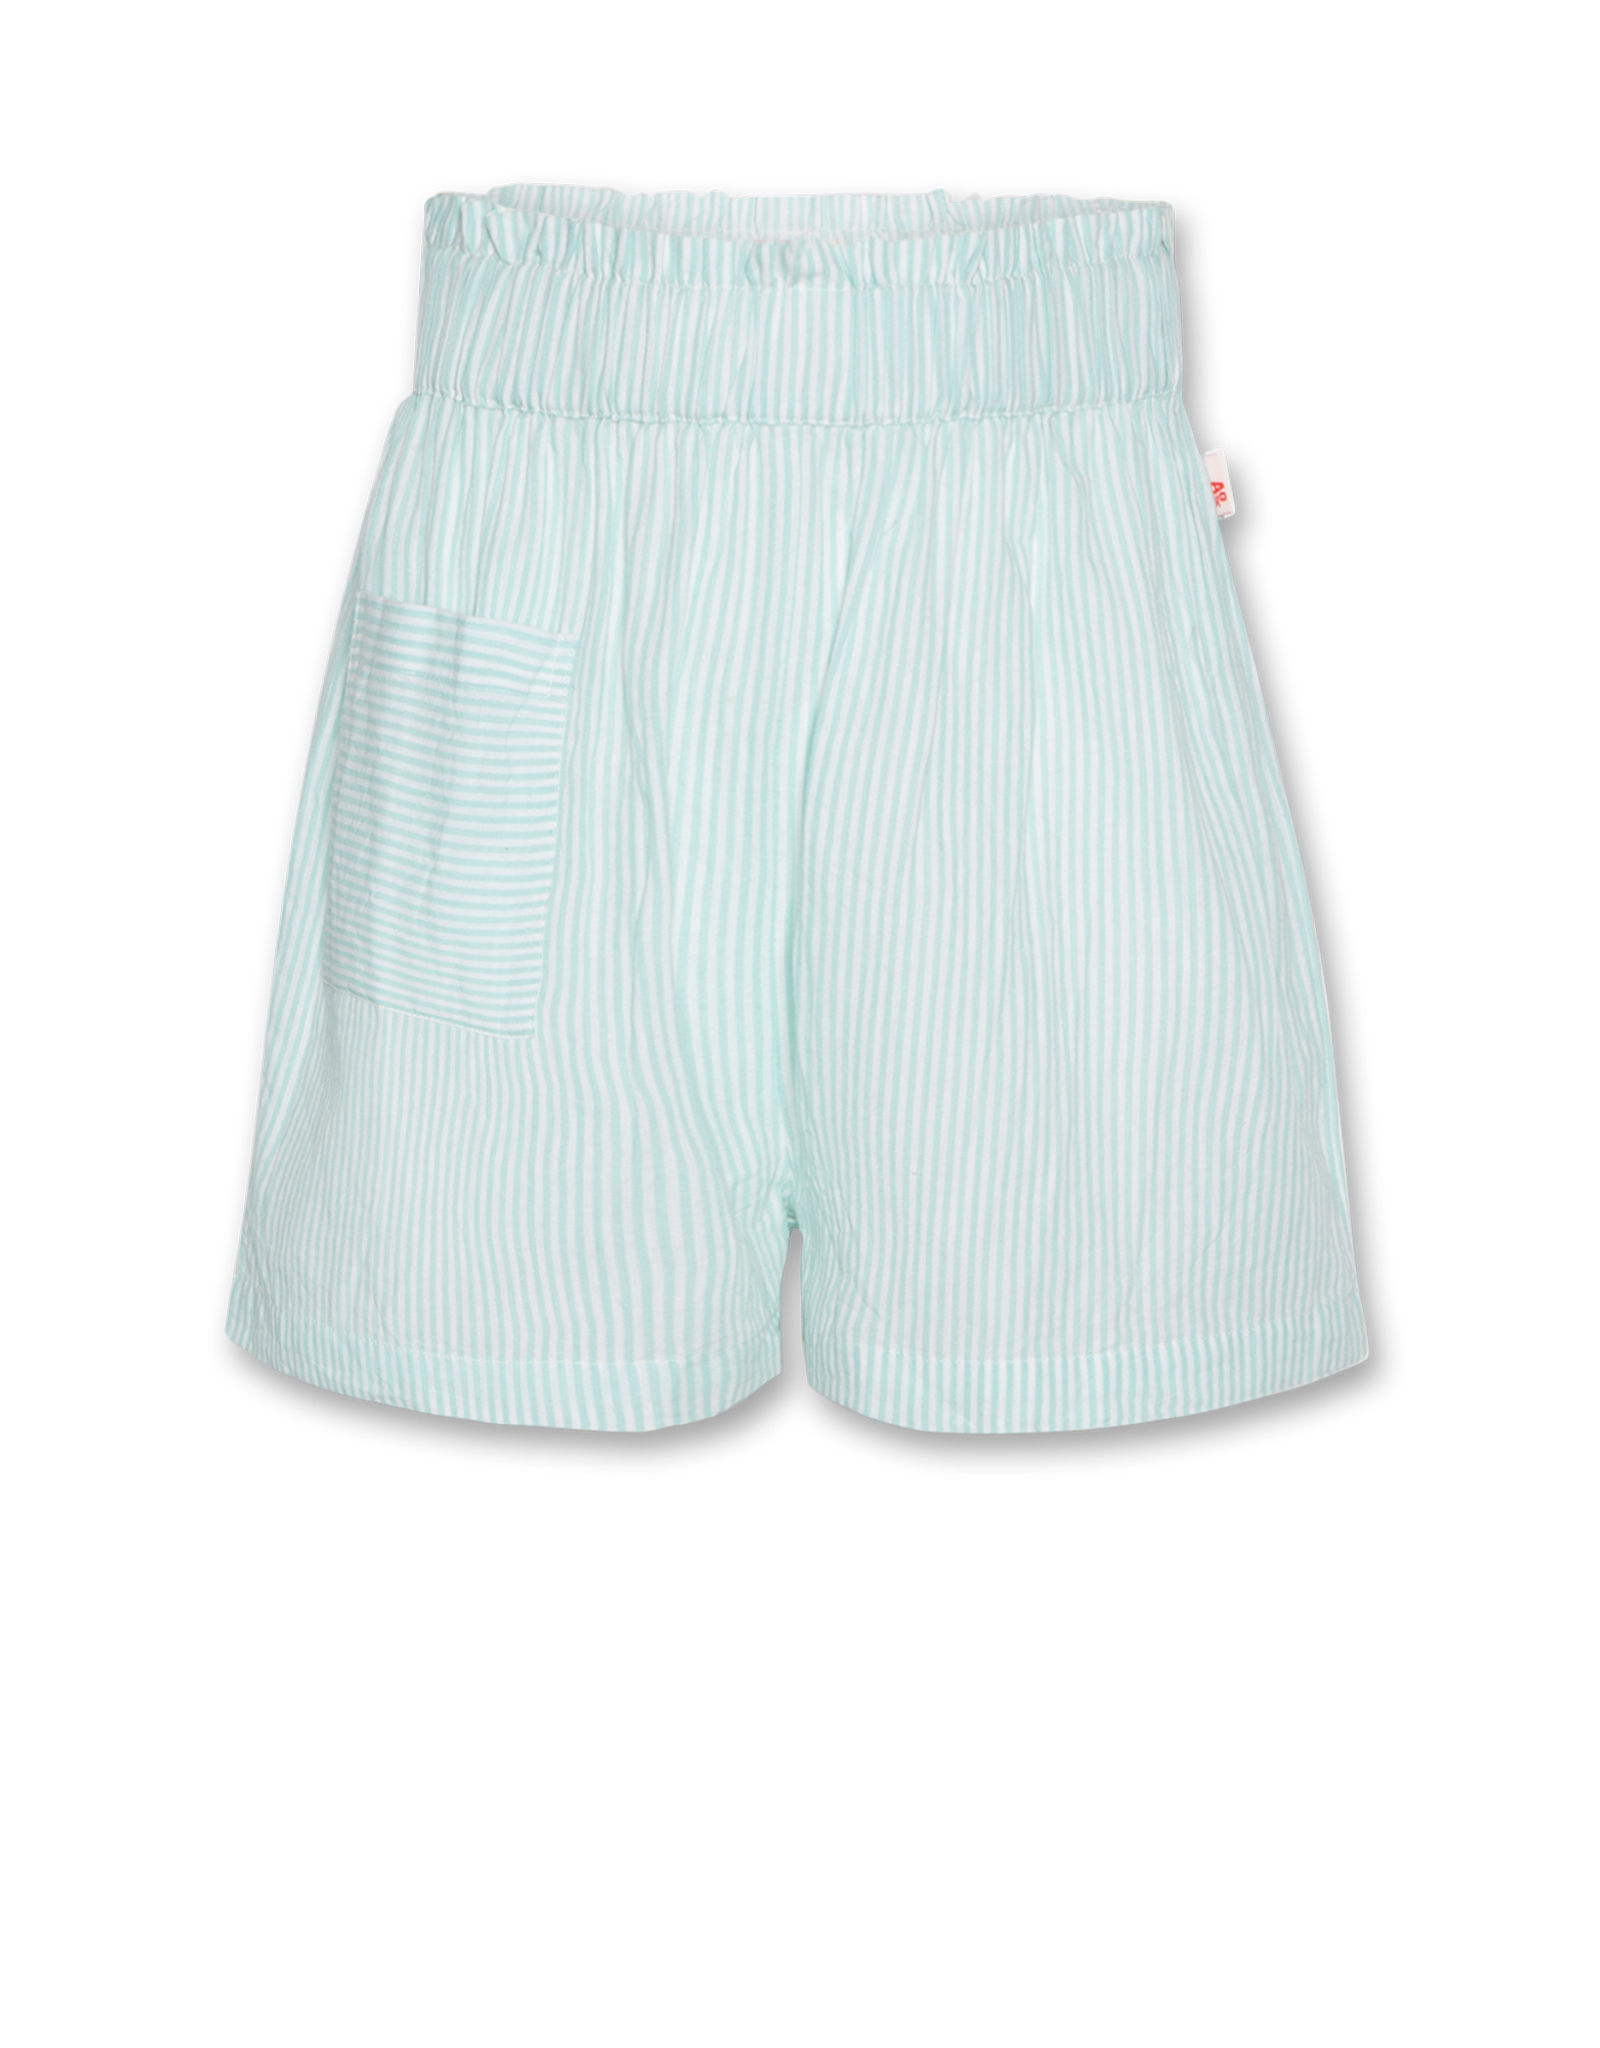 AMERICAN OUTFITTERS Ao76 Lou striped shorts